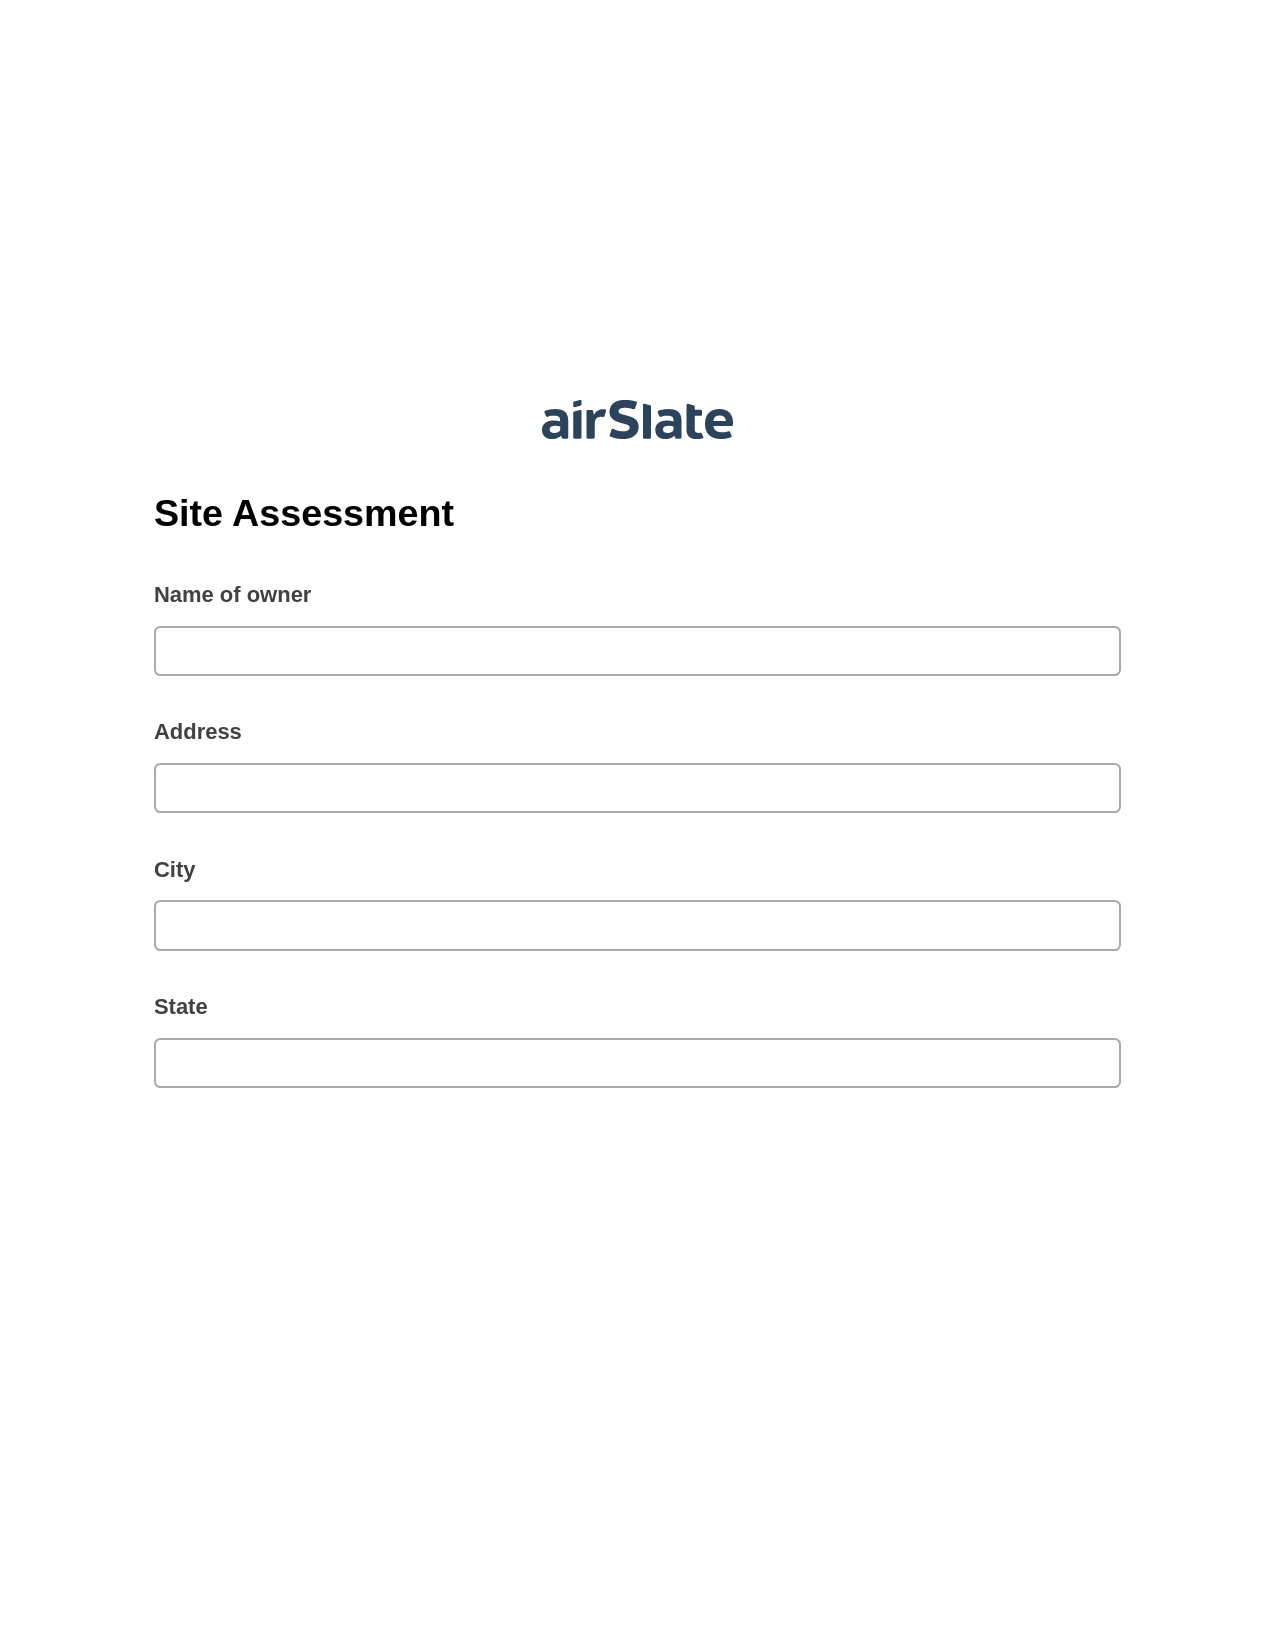 Site Assessment Pre-fill from Excel Spreadsheet Dropdown Options Bot, Set signature type addon, Slack Notification Postfinish Bot